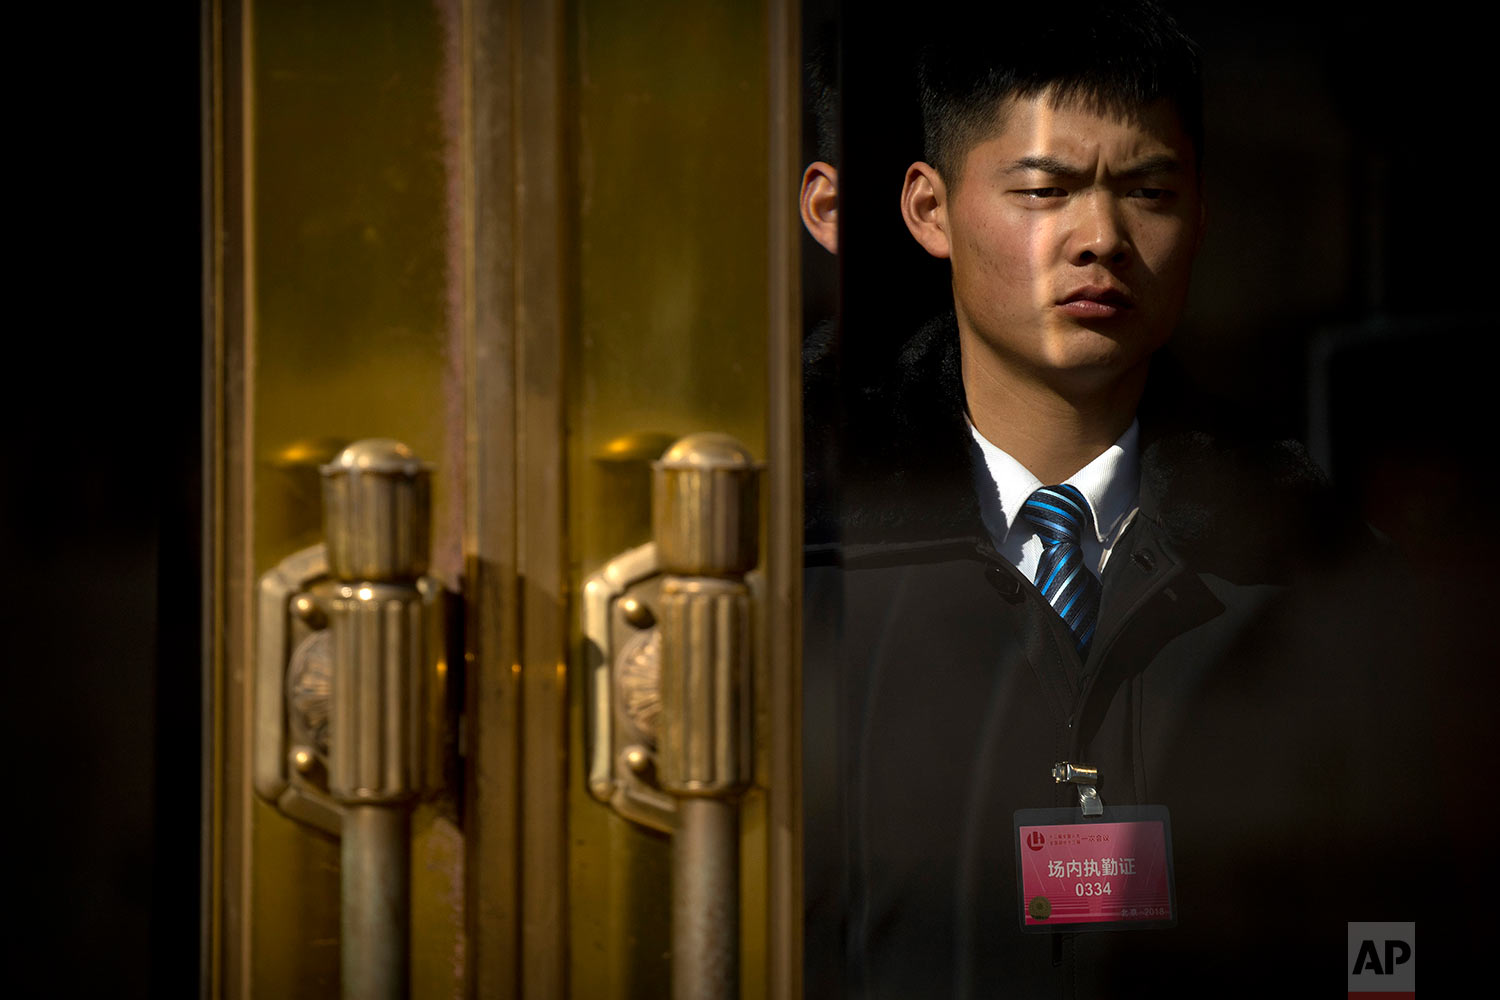  In this Thursday, March 8, 2018 photo, a security official stands guard at the doors of the Great Hall of the People during a plenary session of the Chinese People's Political Consultative Conference (CPPCC) in Beijing.   (AP Photo/Mark Schiefelbein